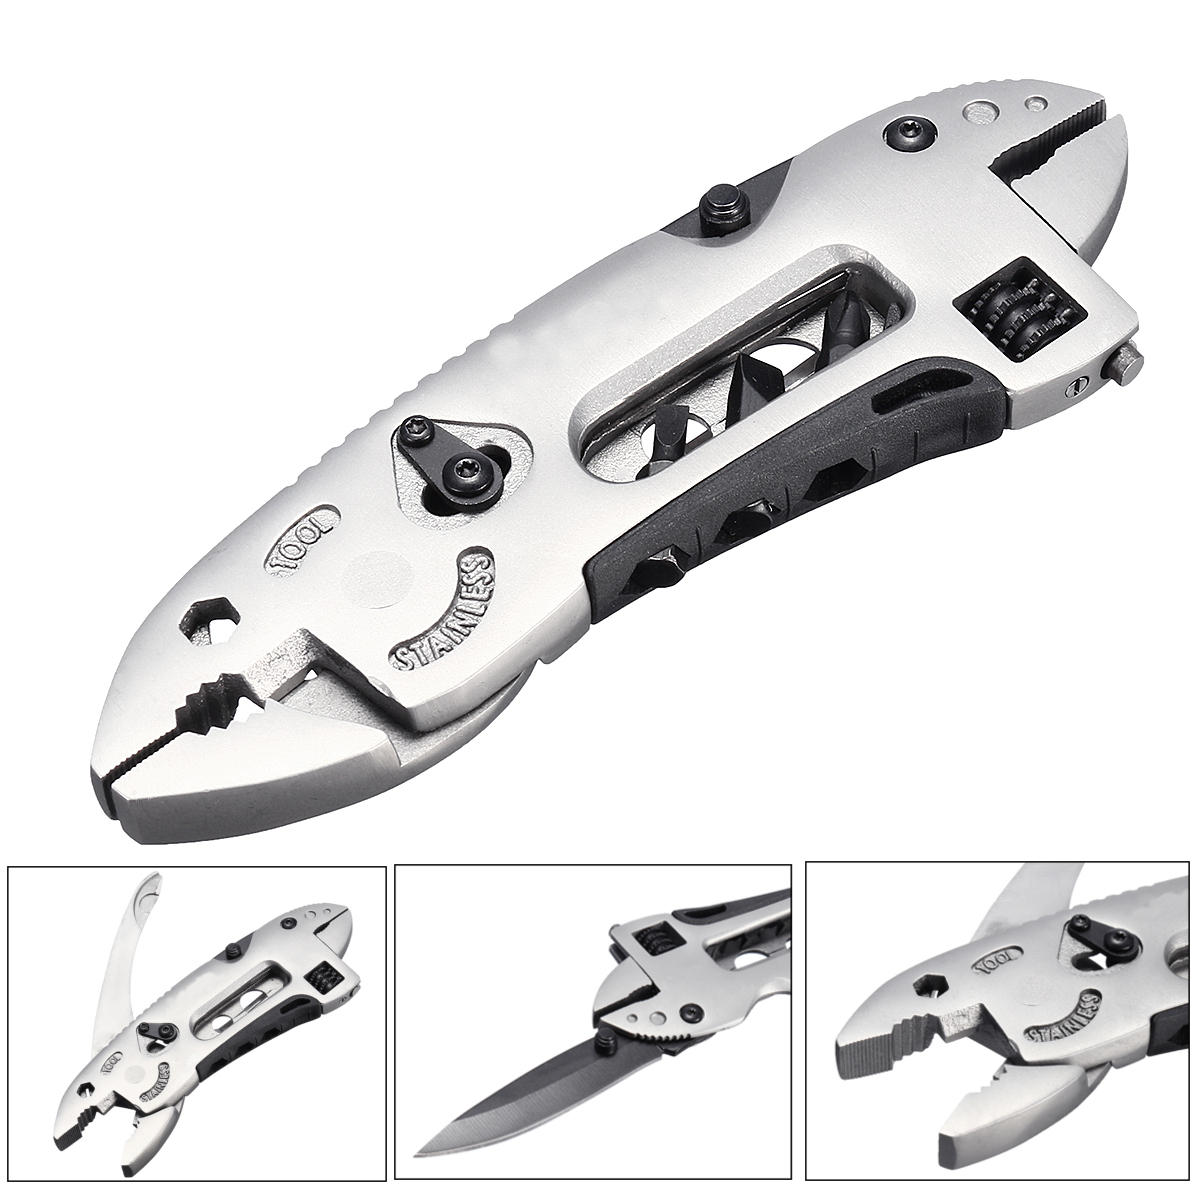 3 in 1 outdoor camping vouwen multi tools tang schroevendraaier wrench multifunctionele edc kits